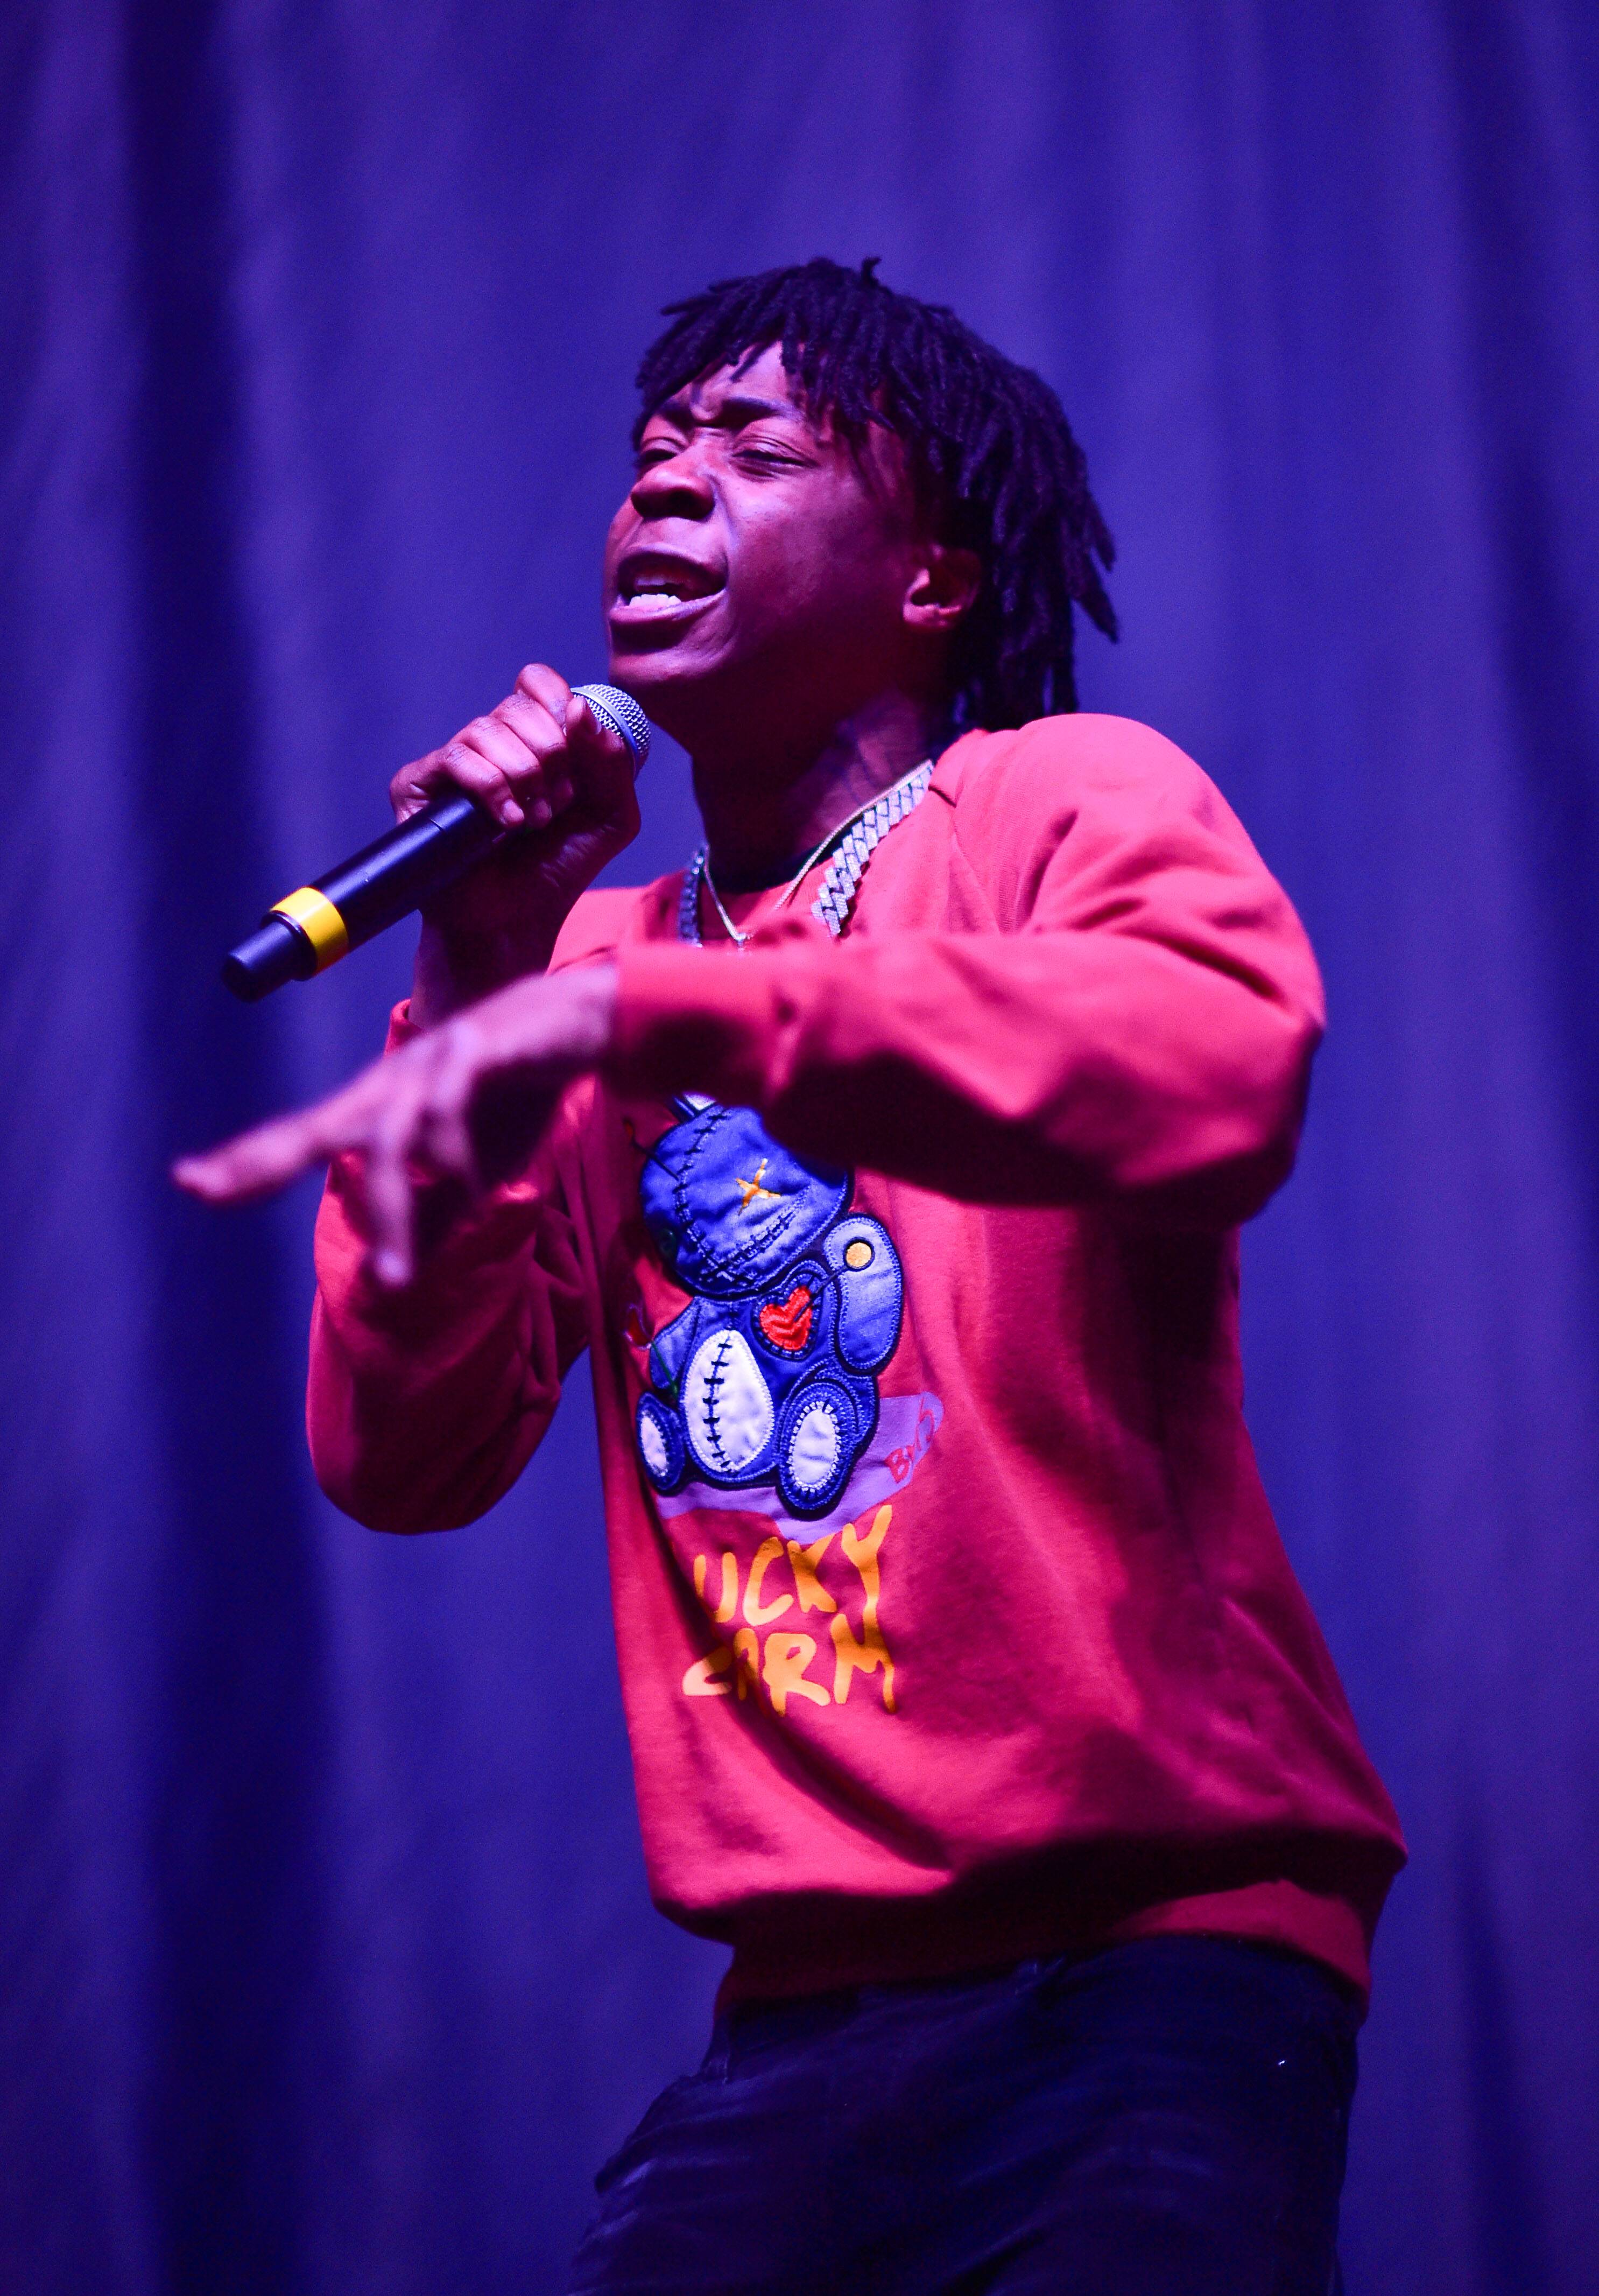 ATLANTA, GA - MARCH 11: Rapper Lil Loaded performs during The PTSD Tour In Concert at The Tabernacle on March 11, 2020 in Atlanta, Georgia.(Photo by Prince Williams/Wireimage)